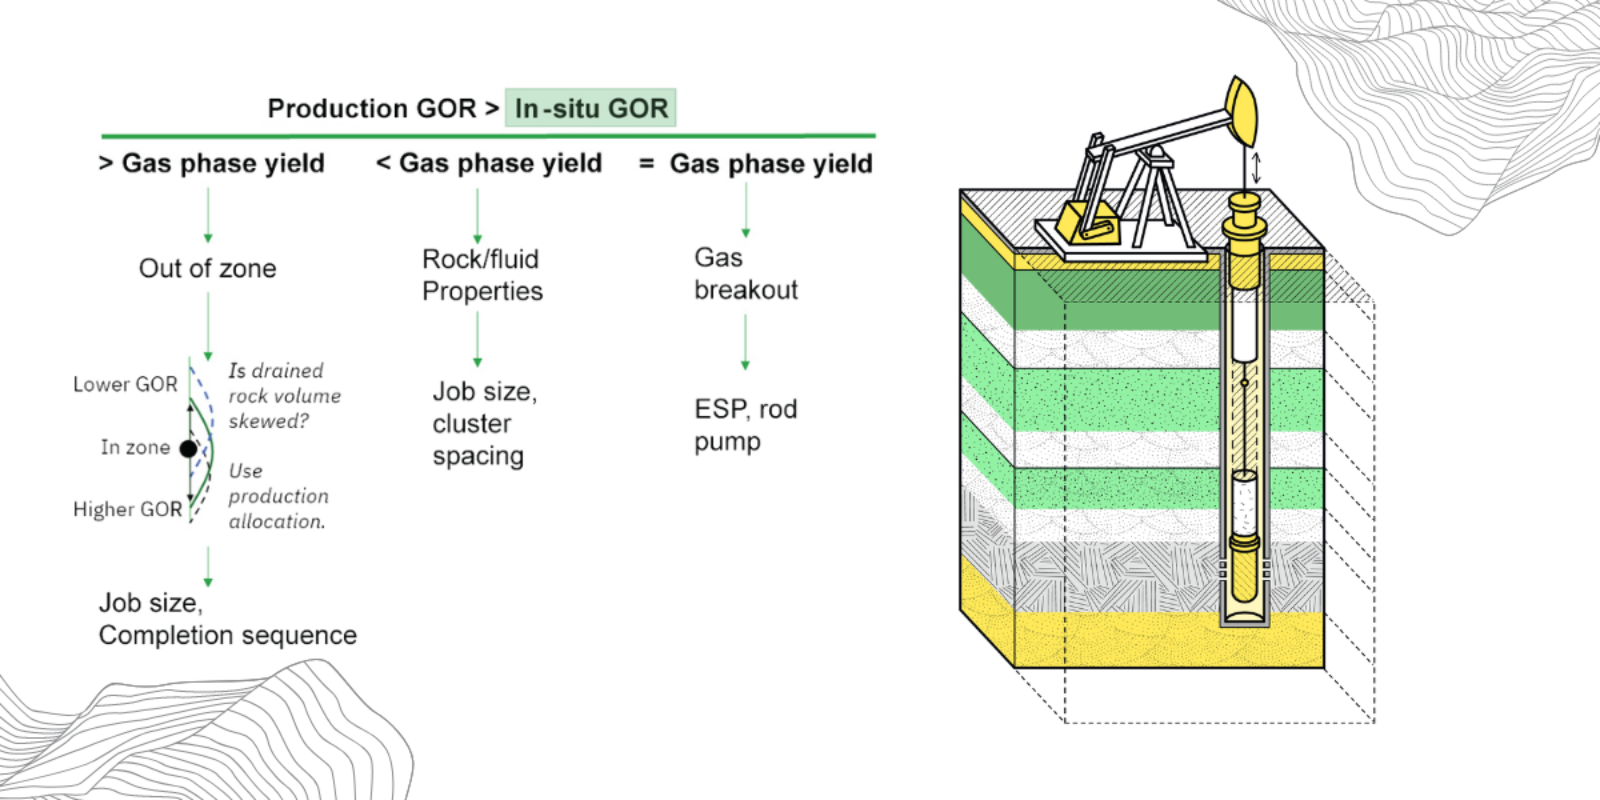 Summary of workflows comparing production GOR to in-situ GOR & gas phase GOR to understand production GOR.